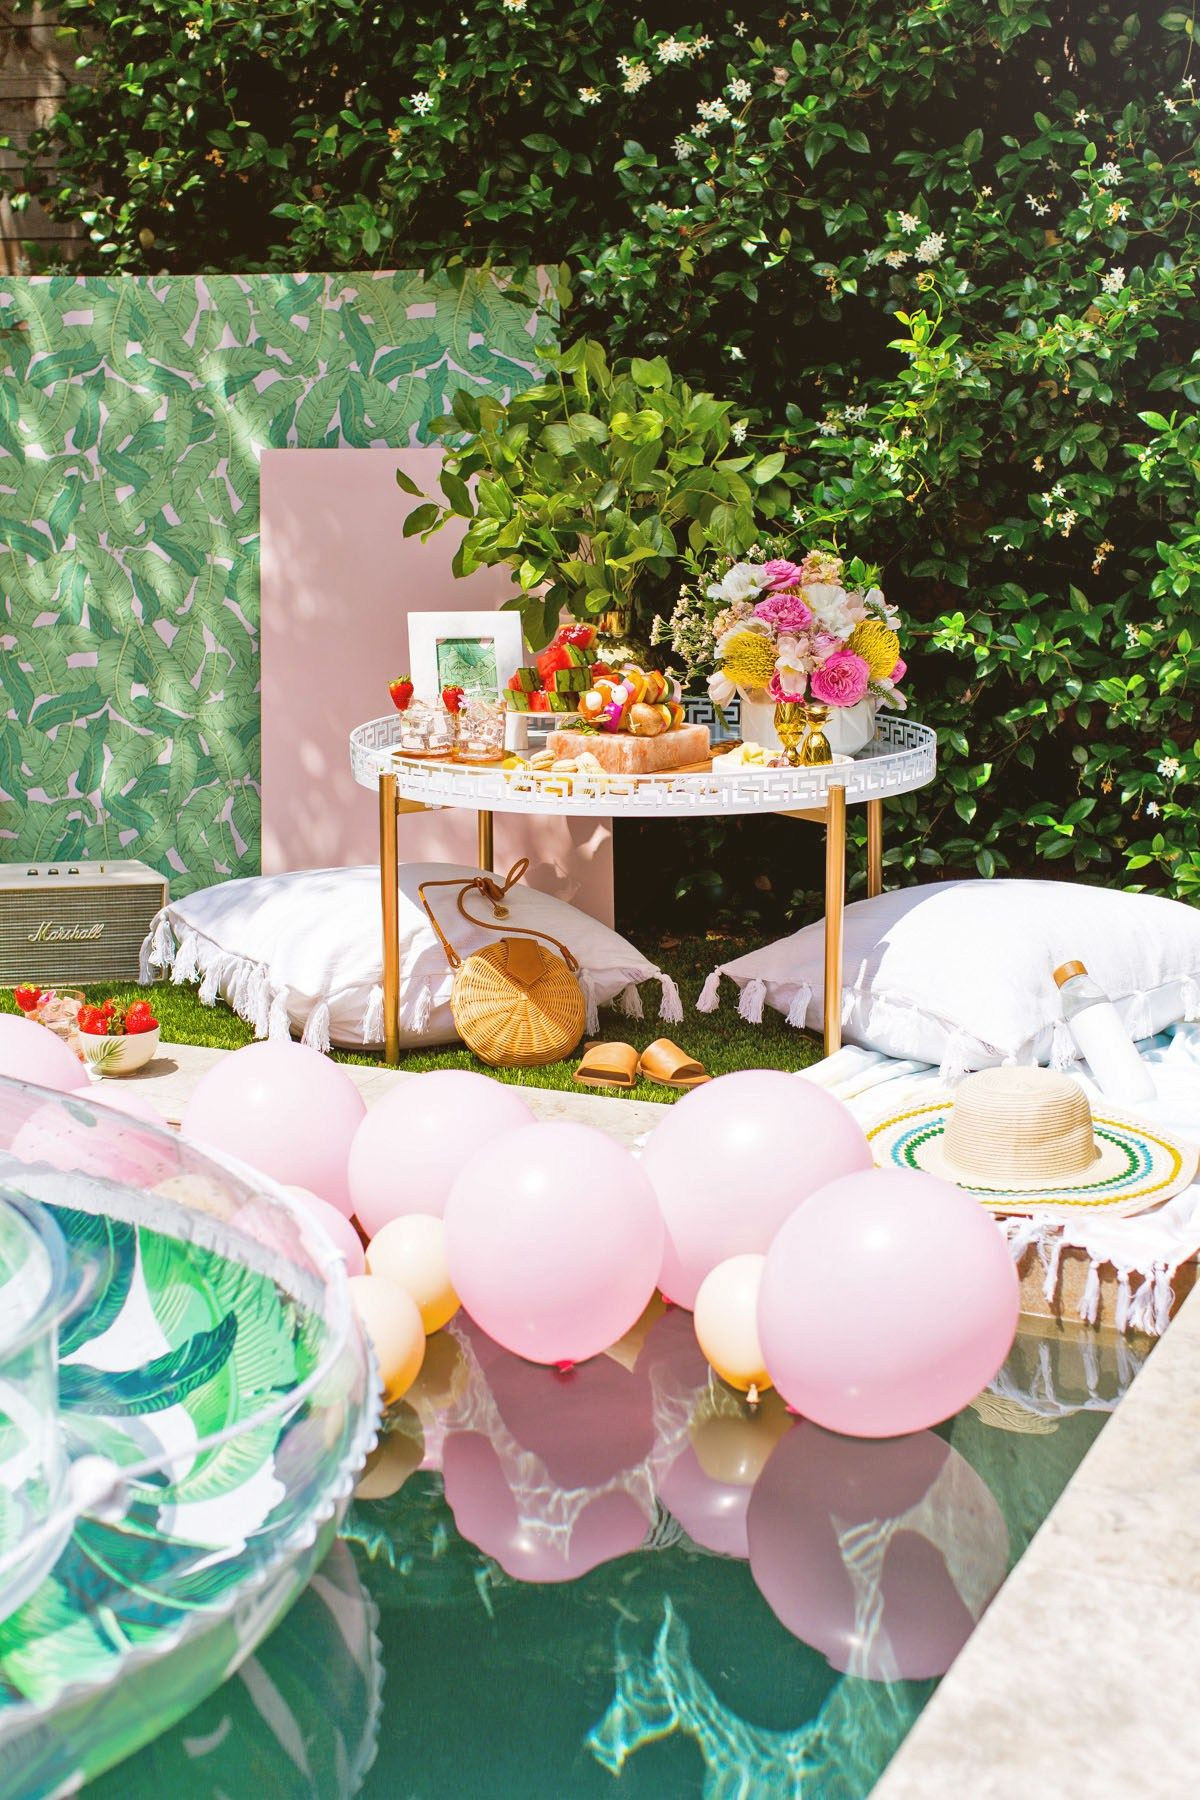 Ideas For Backyard Girls Birthday Pool Party
 Luxe Poolside Entertaining